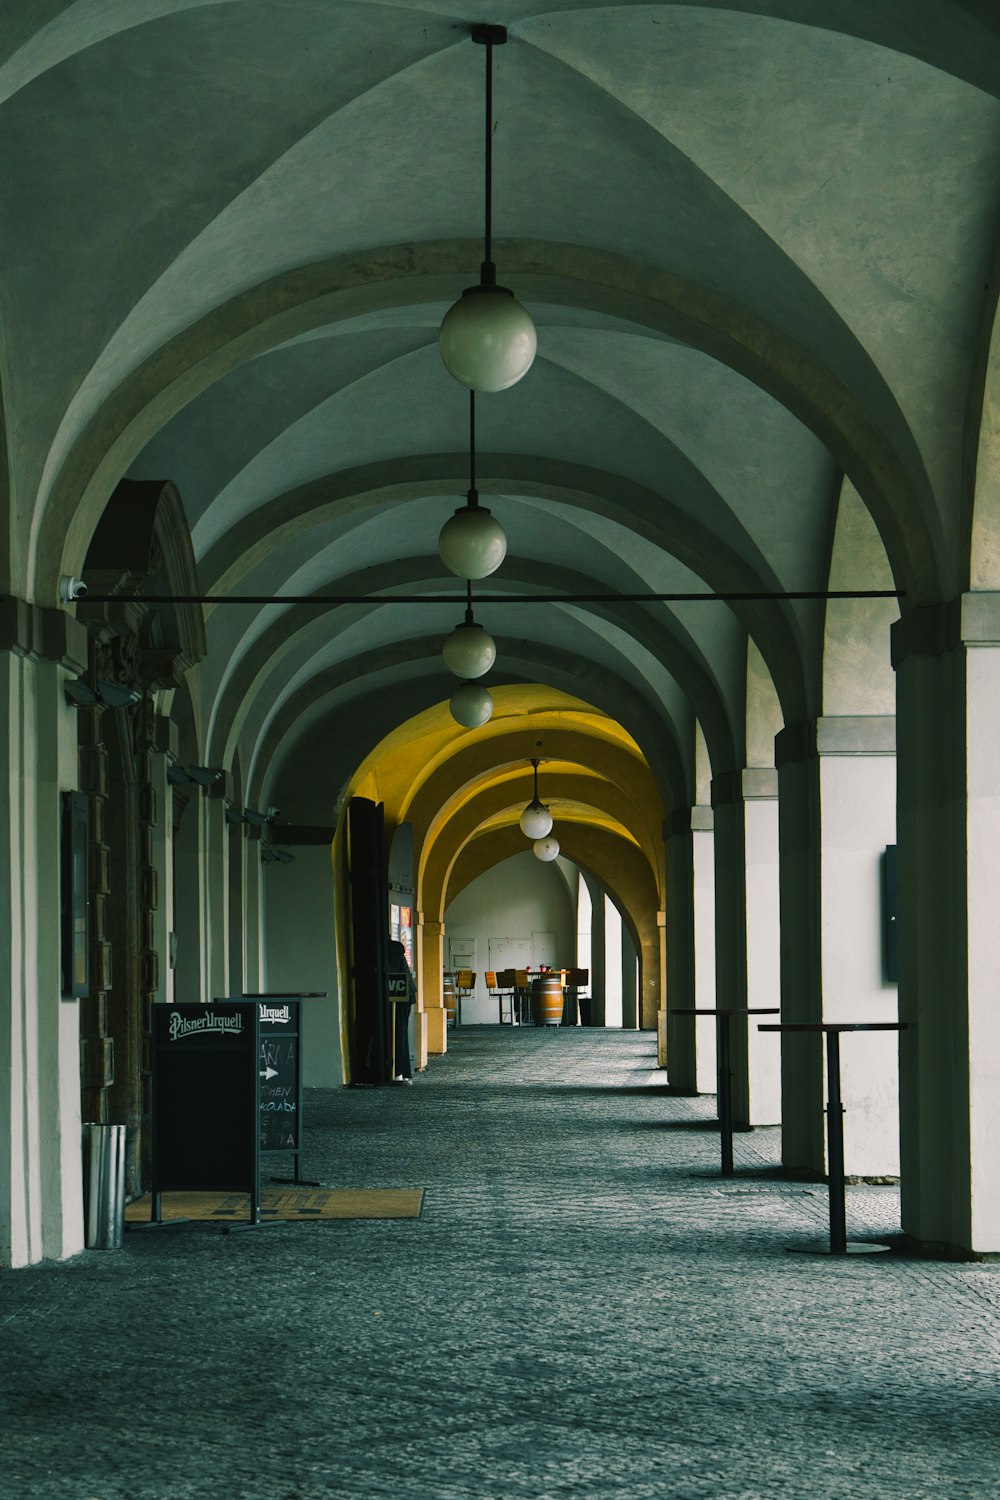 a long hallway with arches and lamps hanging from the ceiling